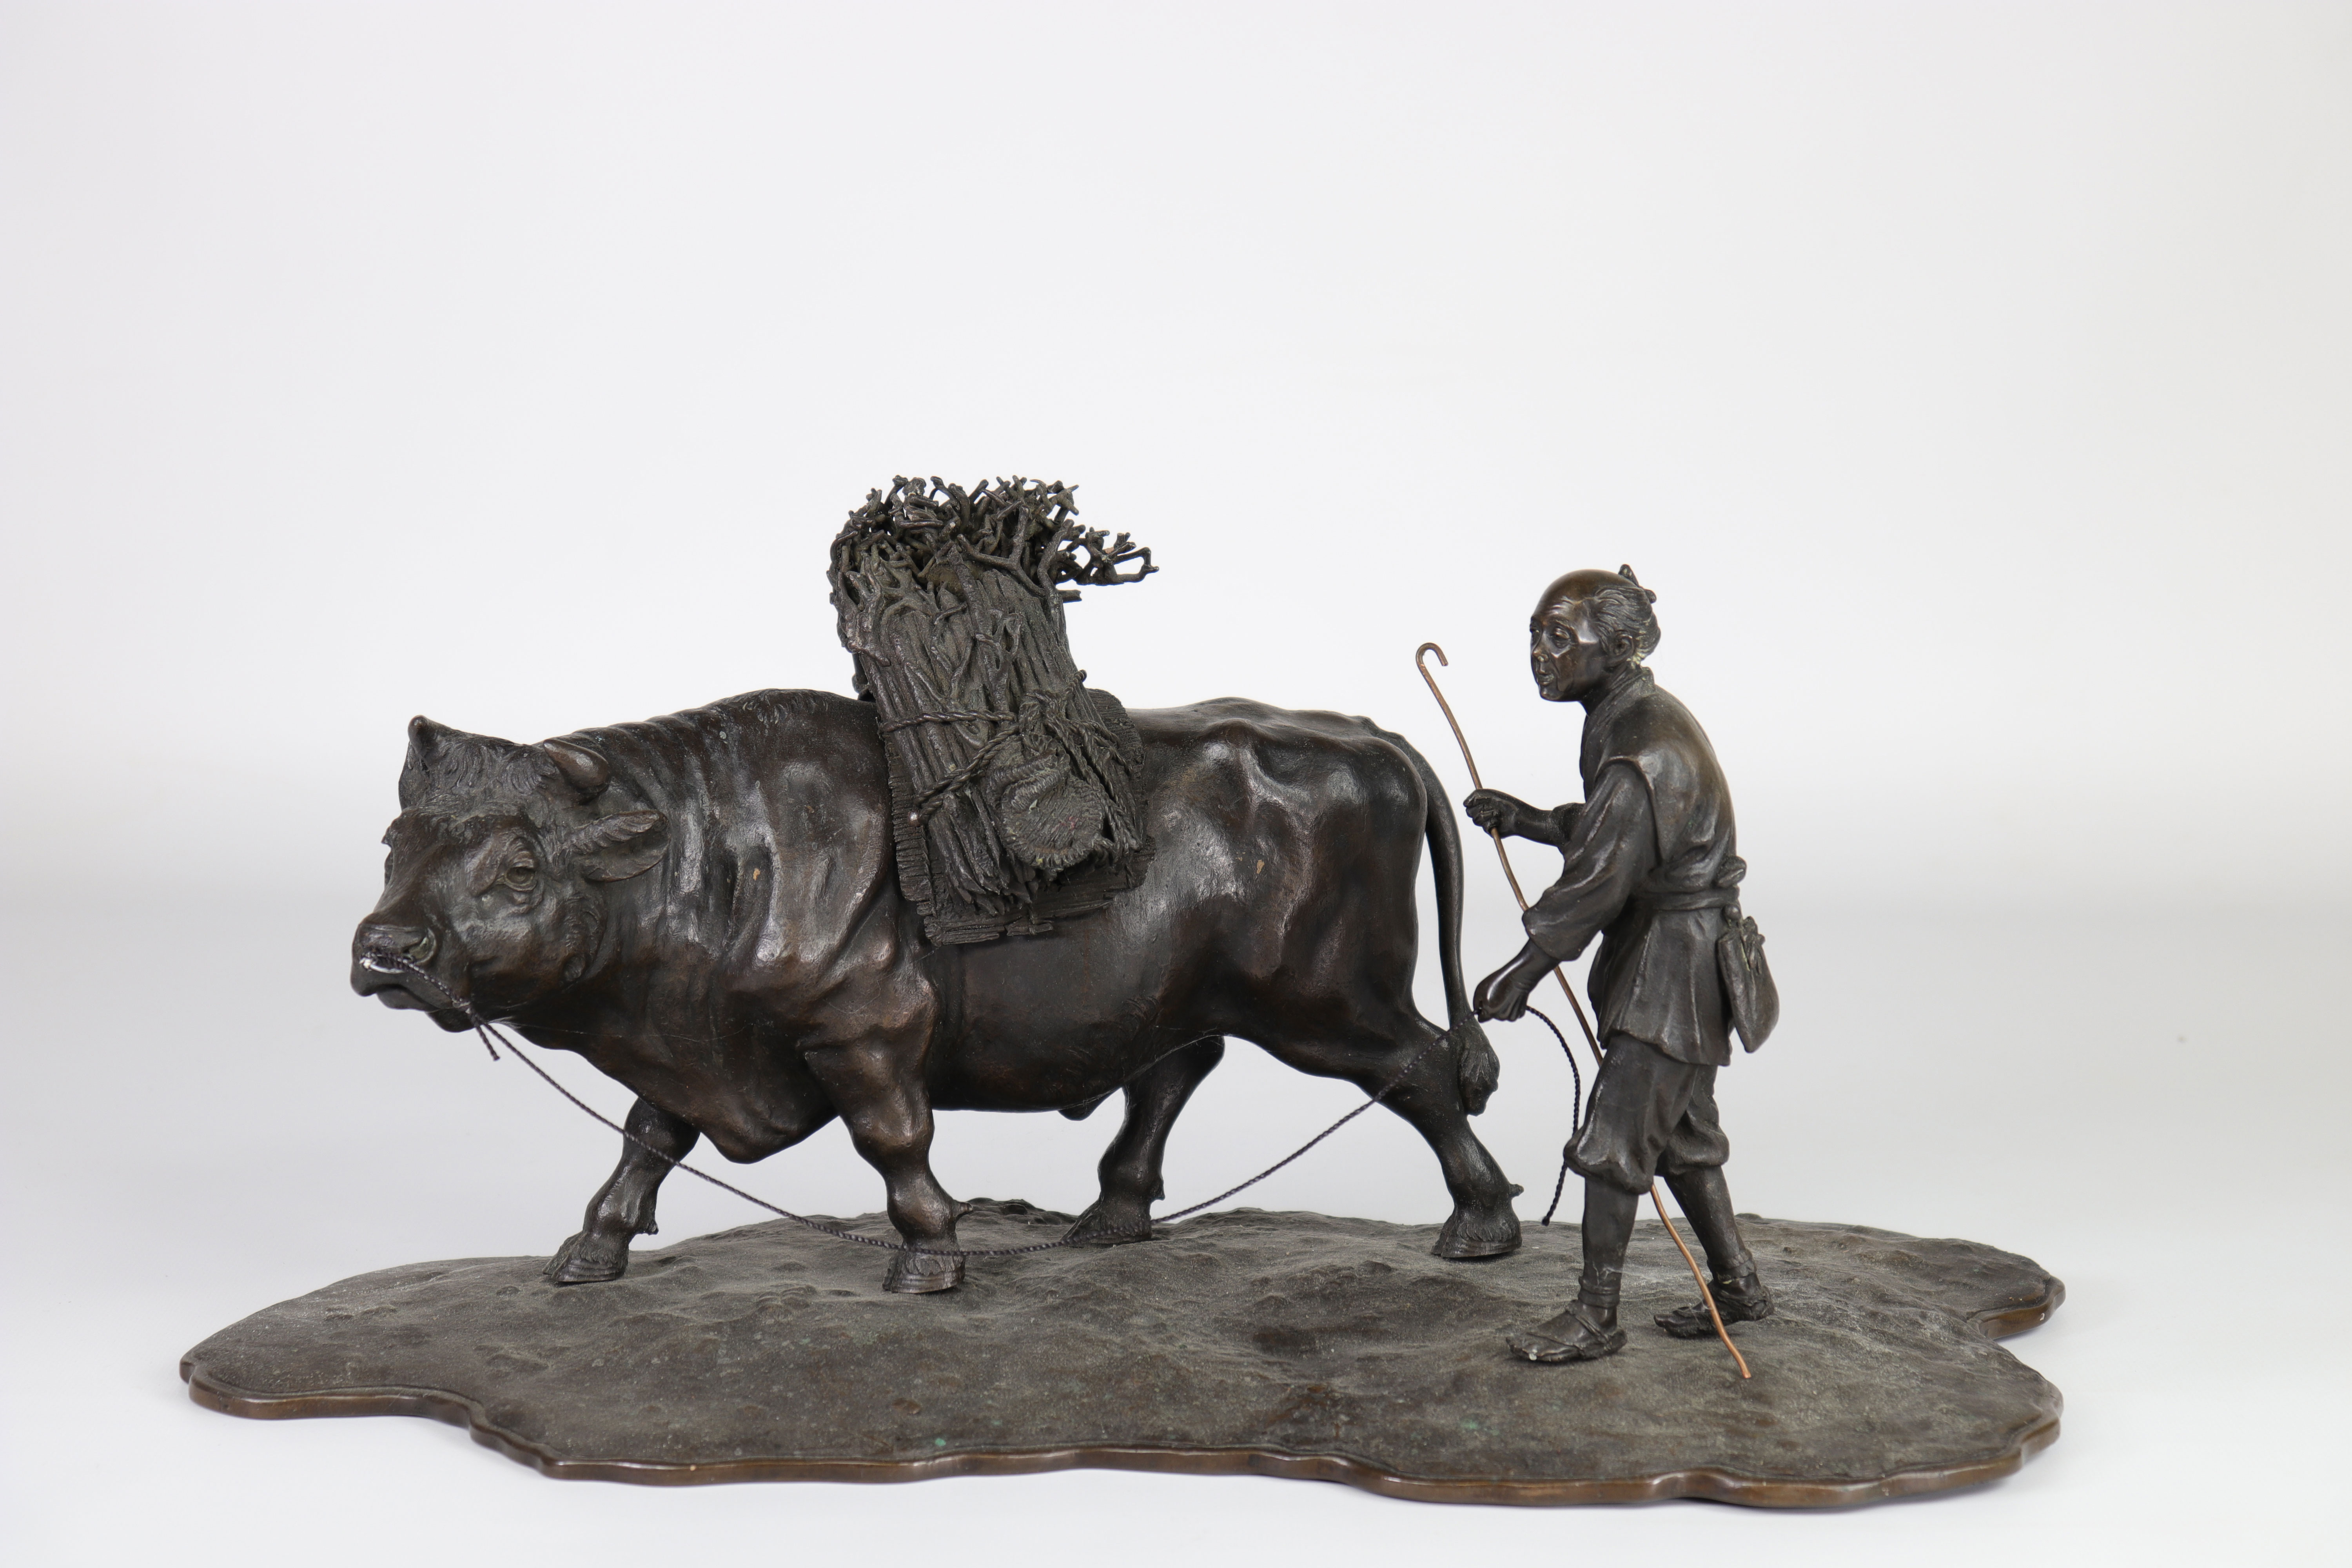 Japan imposing bronze group "peasants and ox" 19th